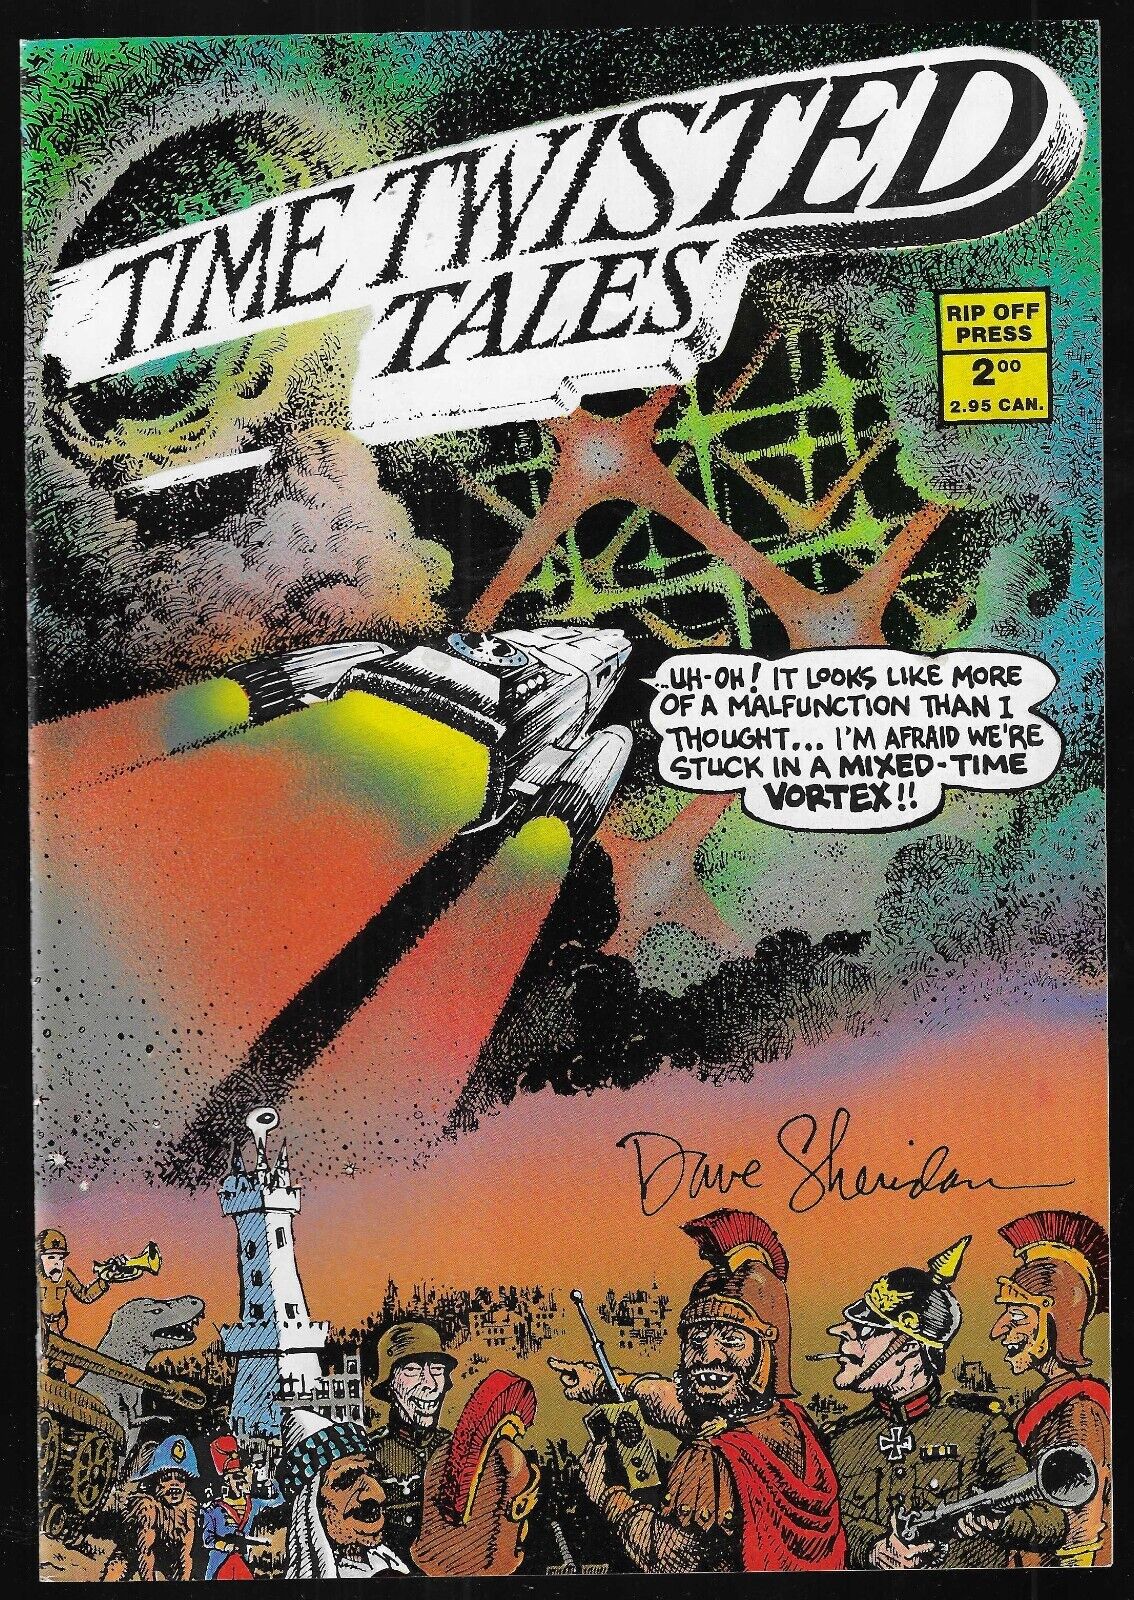 TIME TWISTED TALES #1 - B&W science fiction comic (Dave Sheridan, 1986)